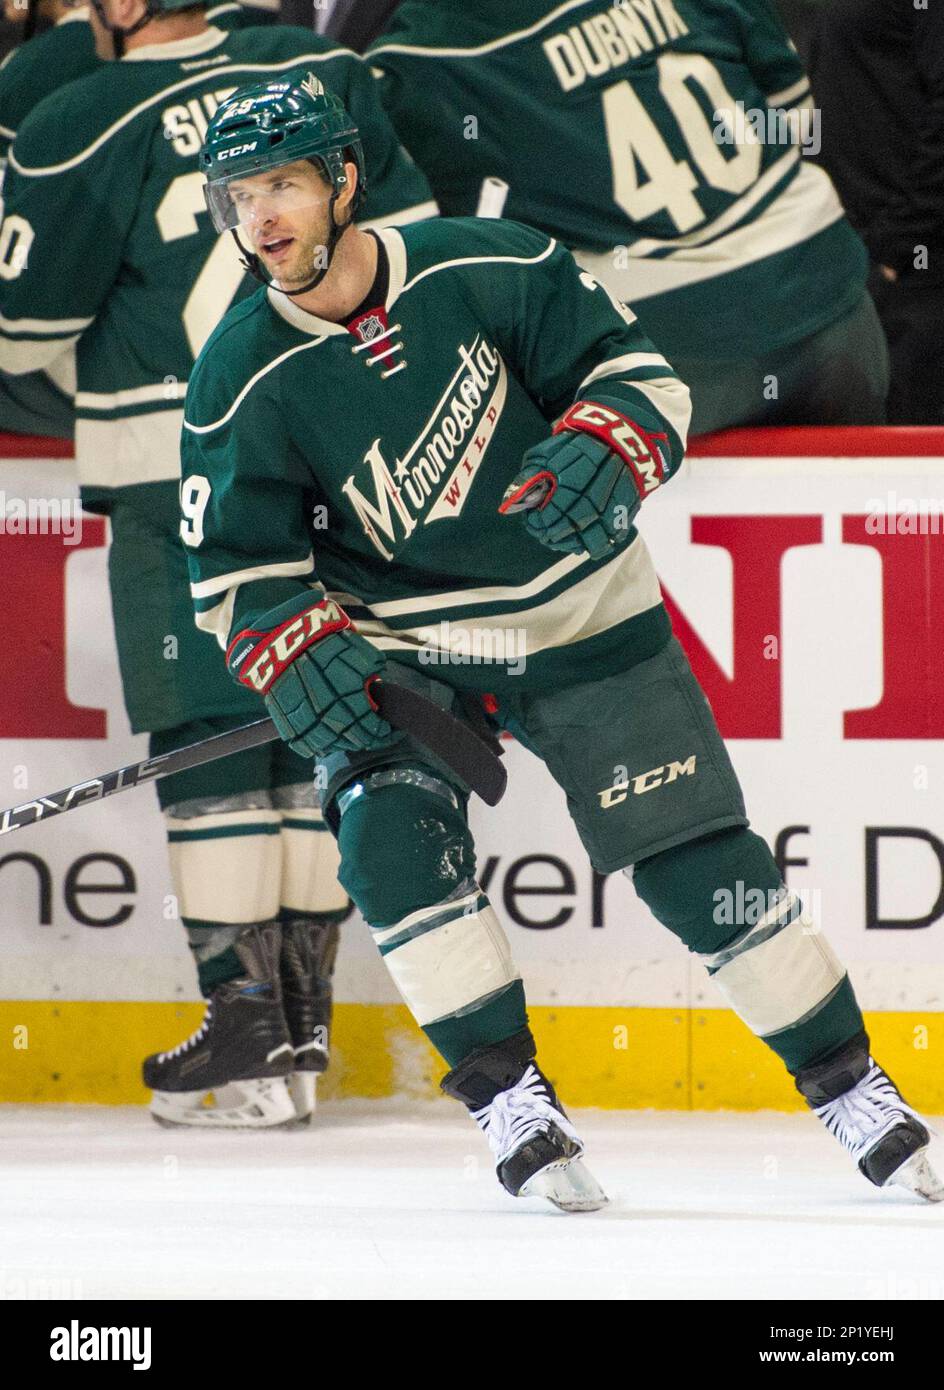 Ryan Suter gets rousing reception from fans after 'awkward' walk into Xcel  Energy Center